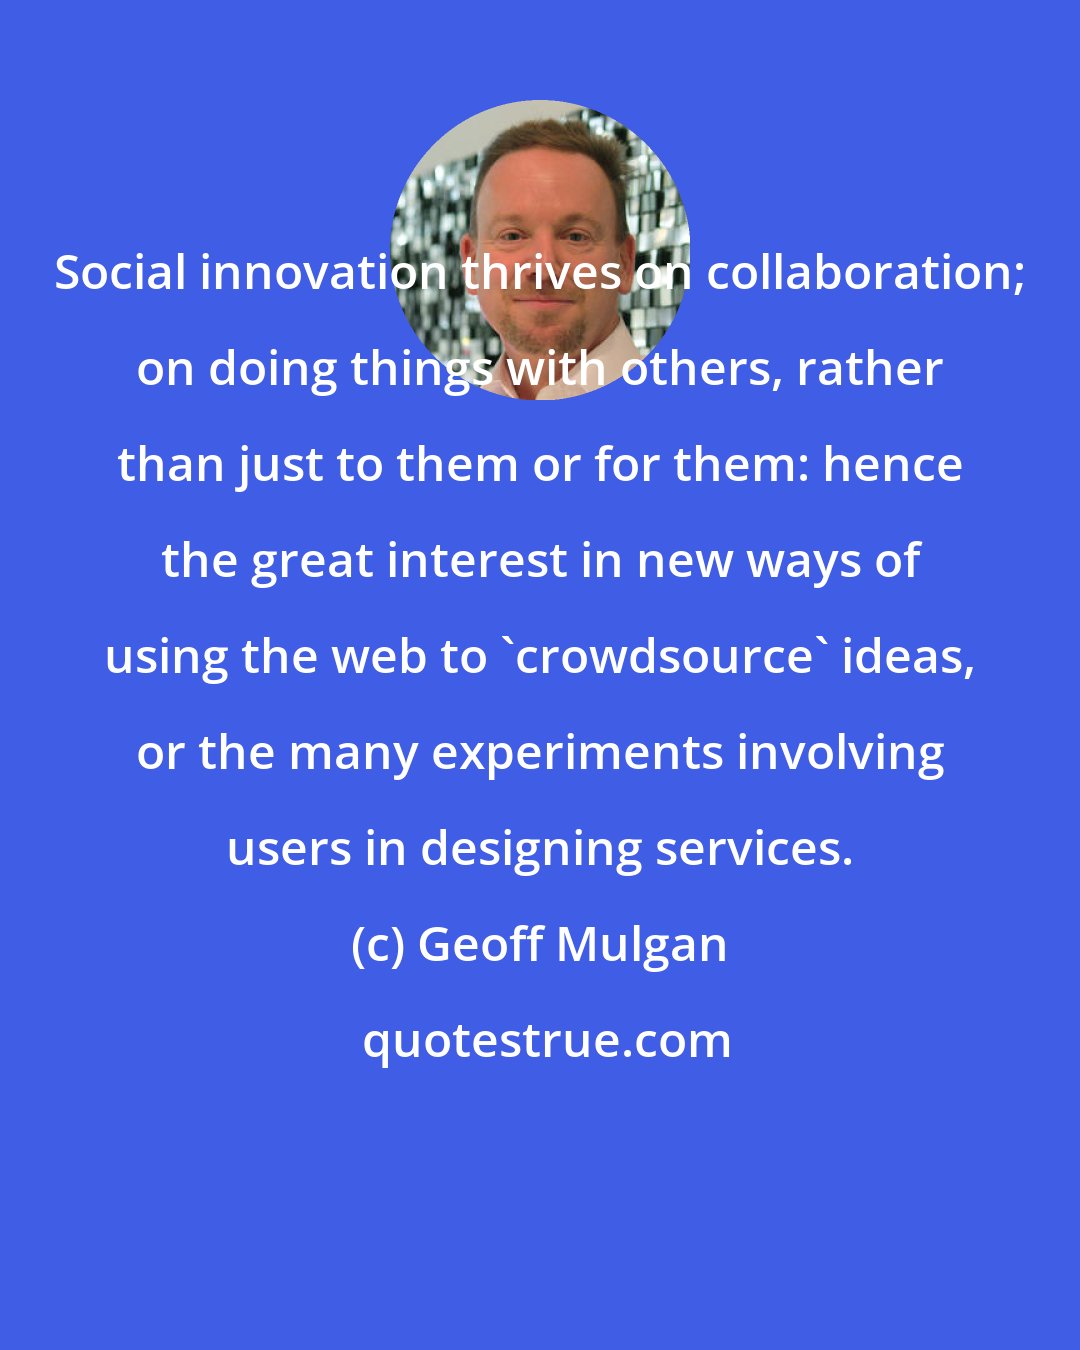 Geoff Mulgan: Social innovation thrives on collaboration; on doing things with others, rather than just to them or for them: hence the great interest in new ways of using the web to 'crowdsource' ideas, or the many experiments involving users in designing services.